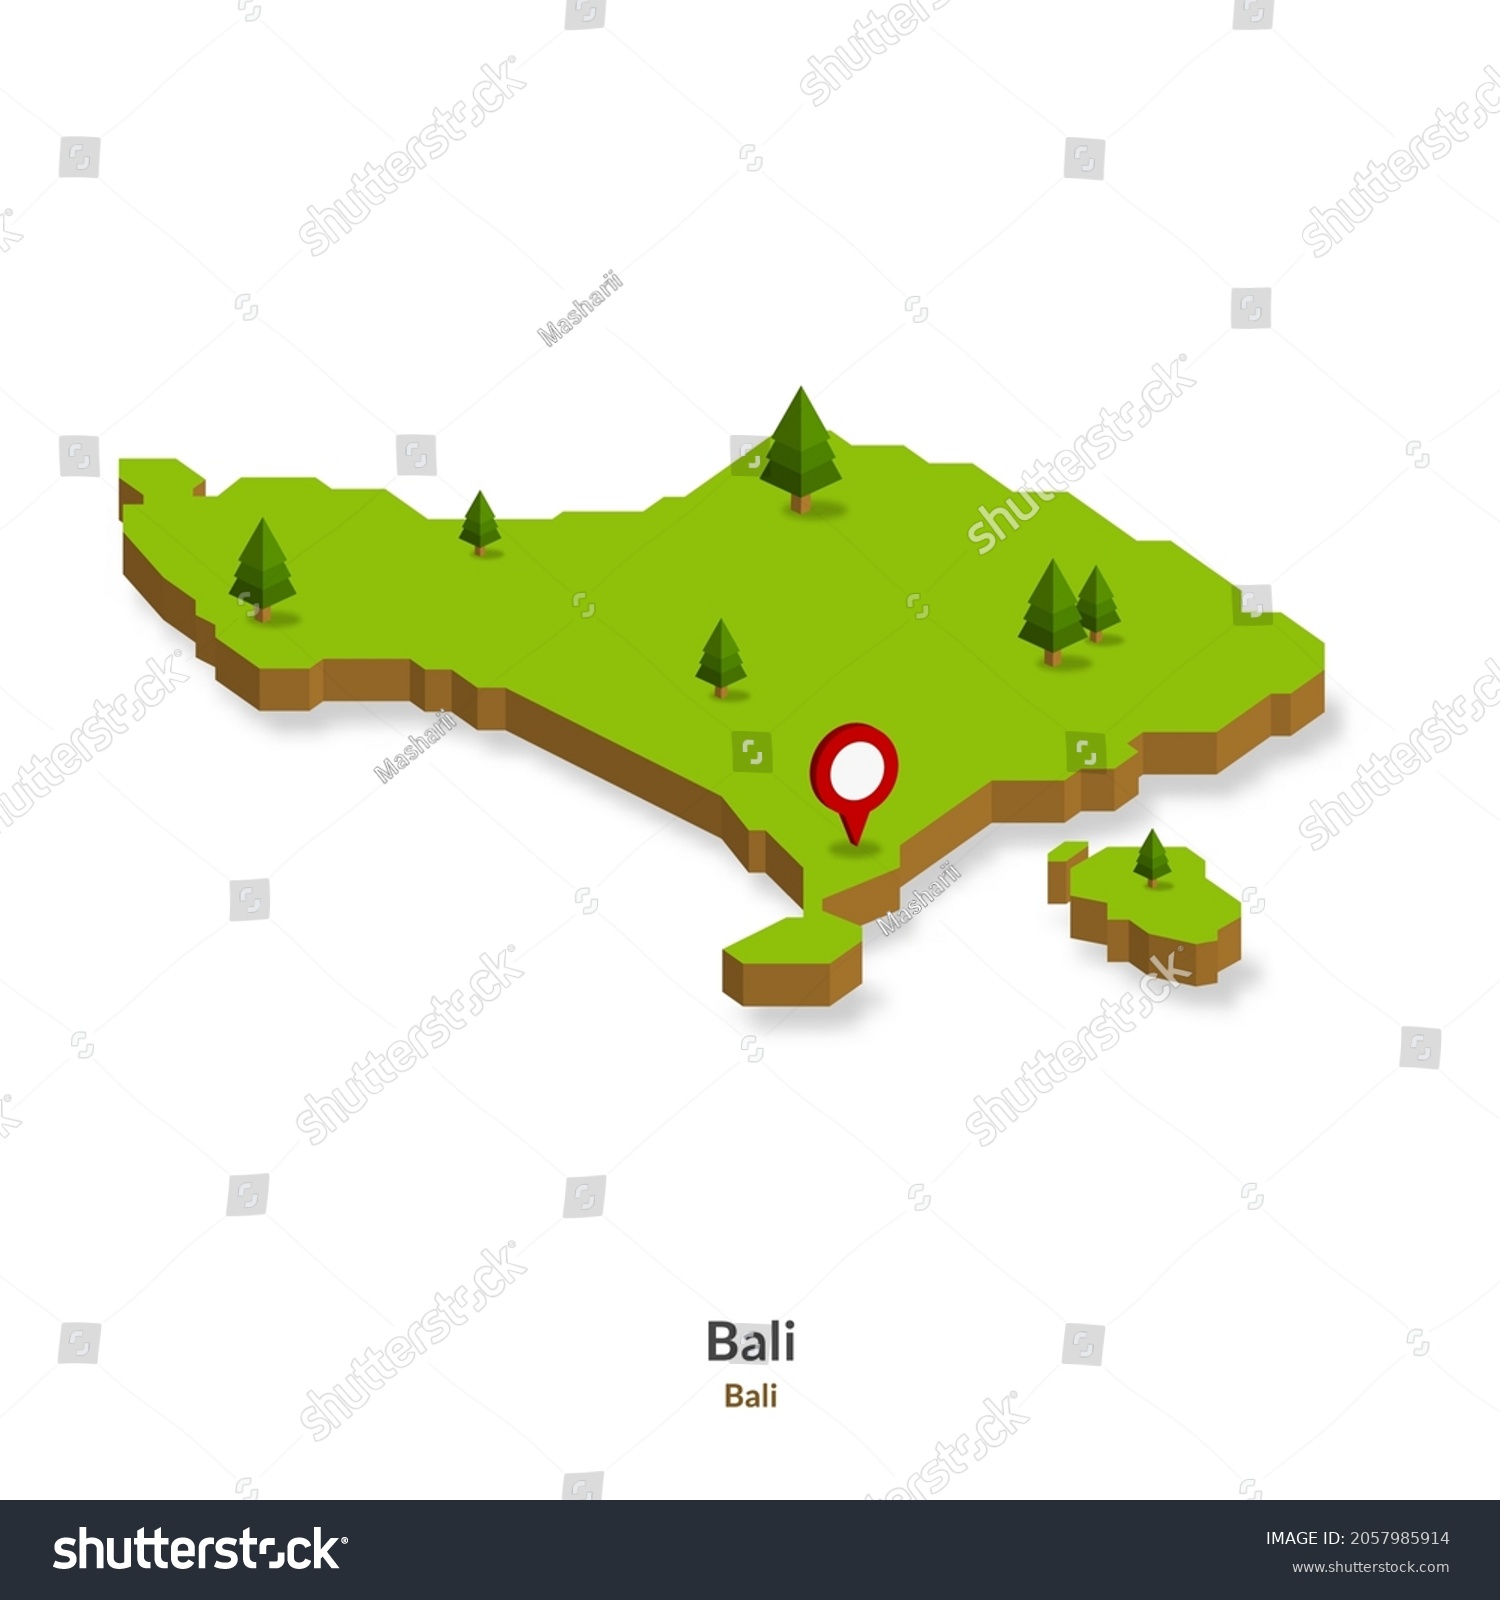 Isometric Map Of Bali Province Indonesia Royalty Free Stock Vector